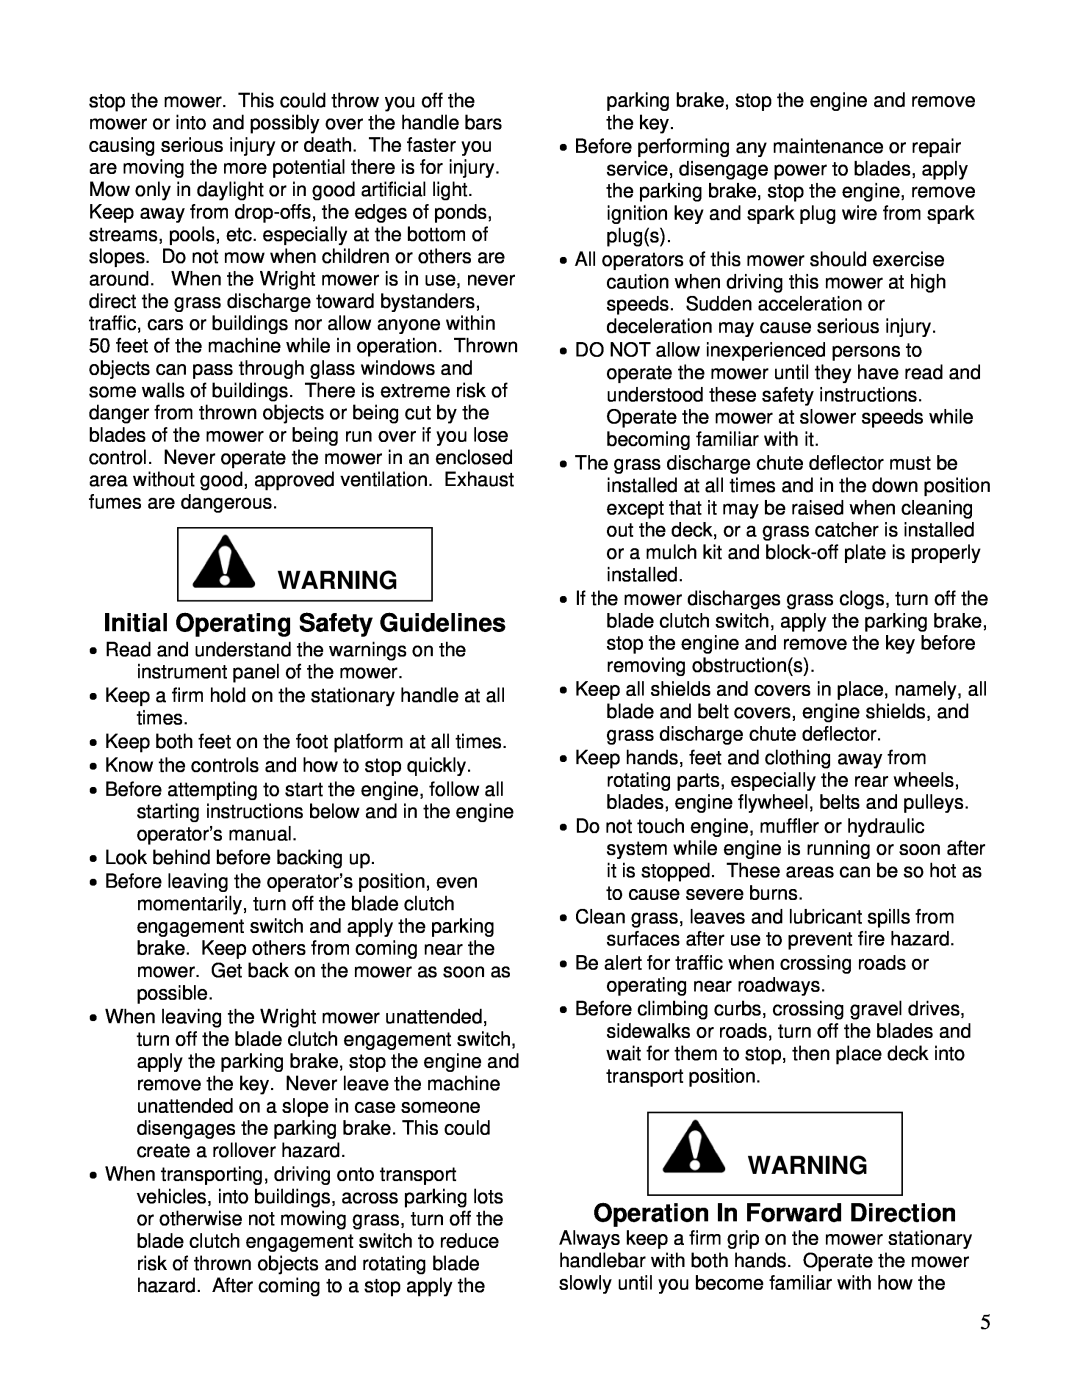 Wright Manufacturing 26077 owner manual Initial Operating Safety Guidelines, Operation In Forward Direction 